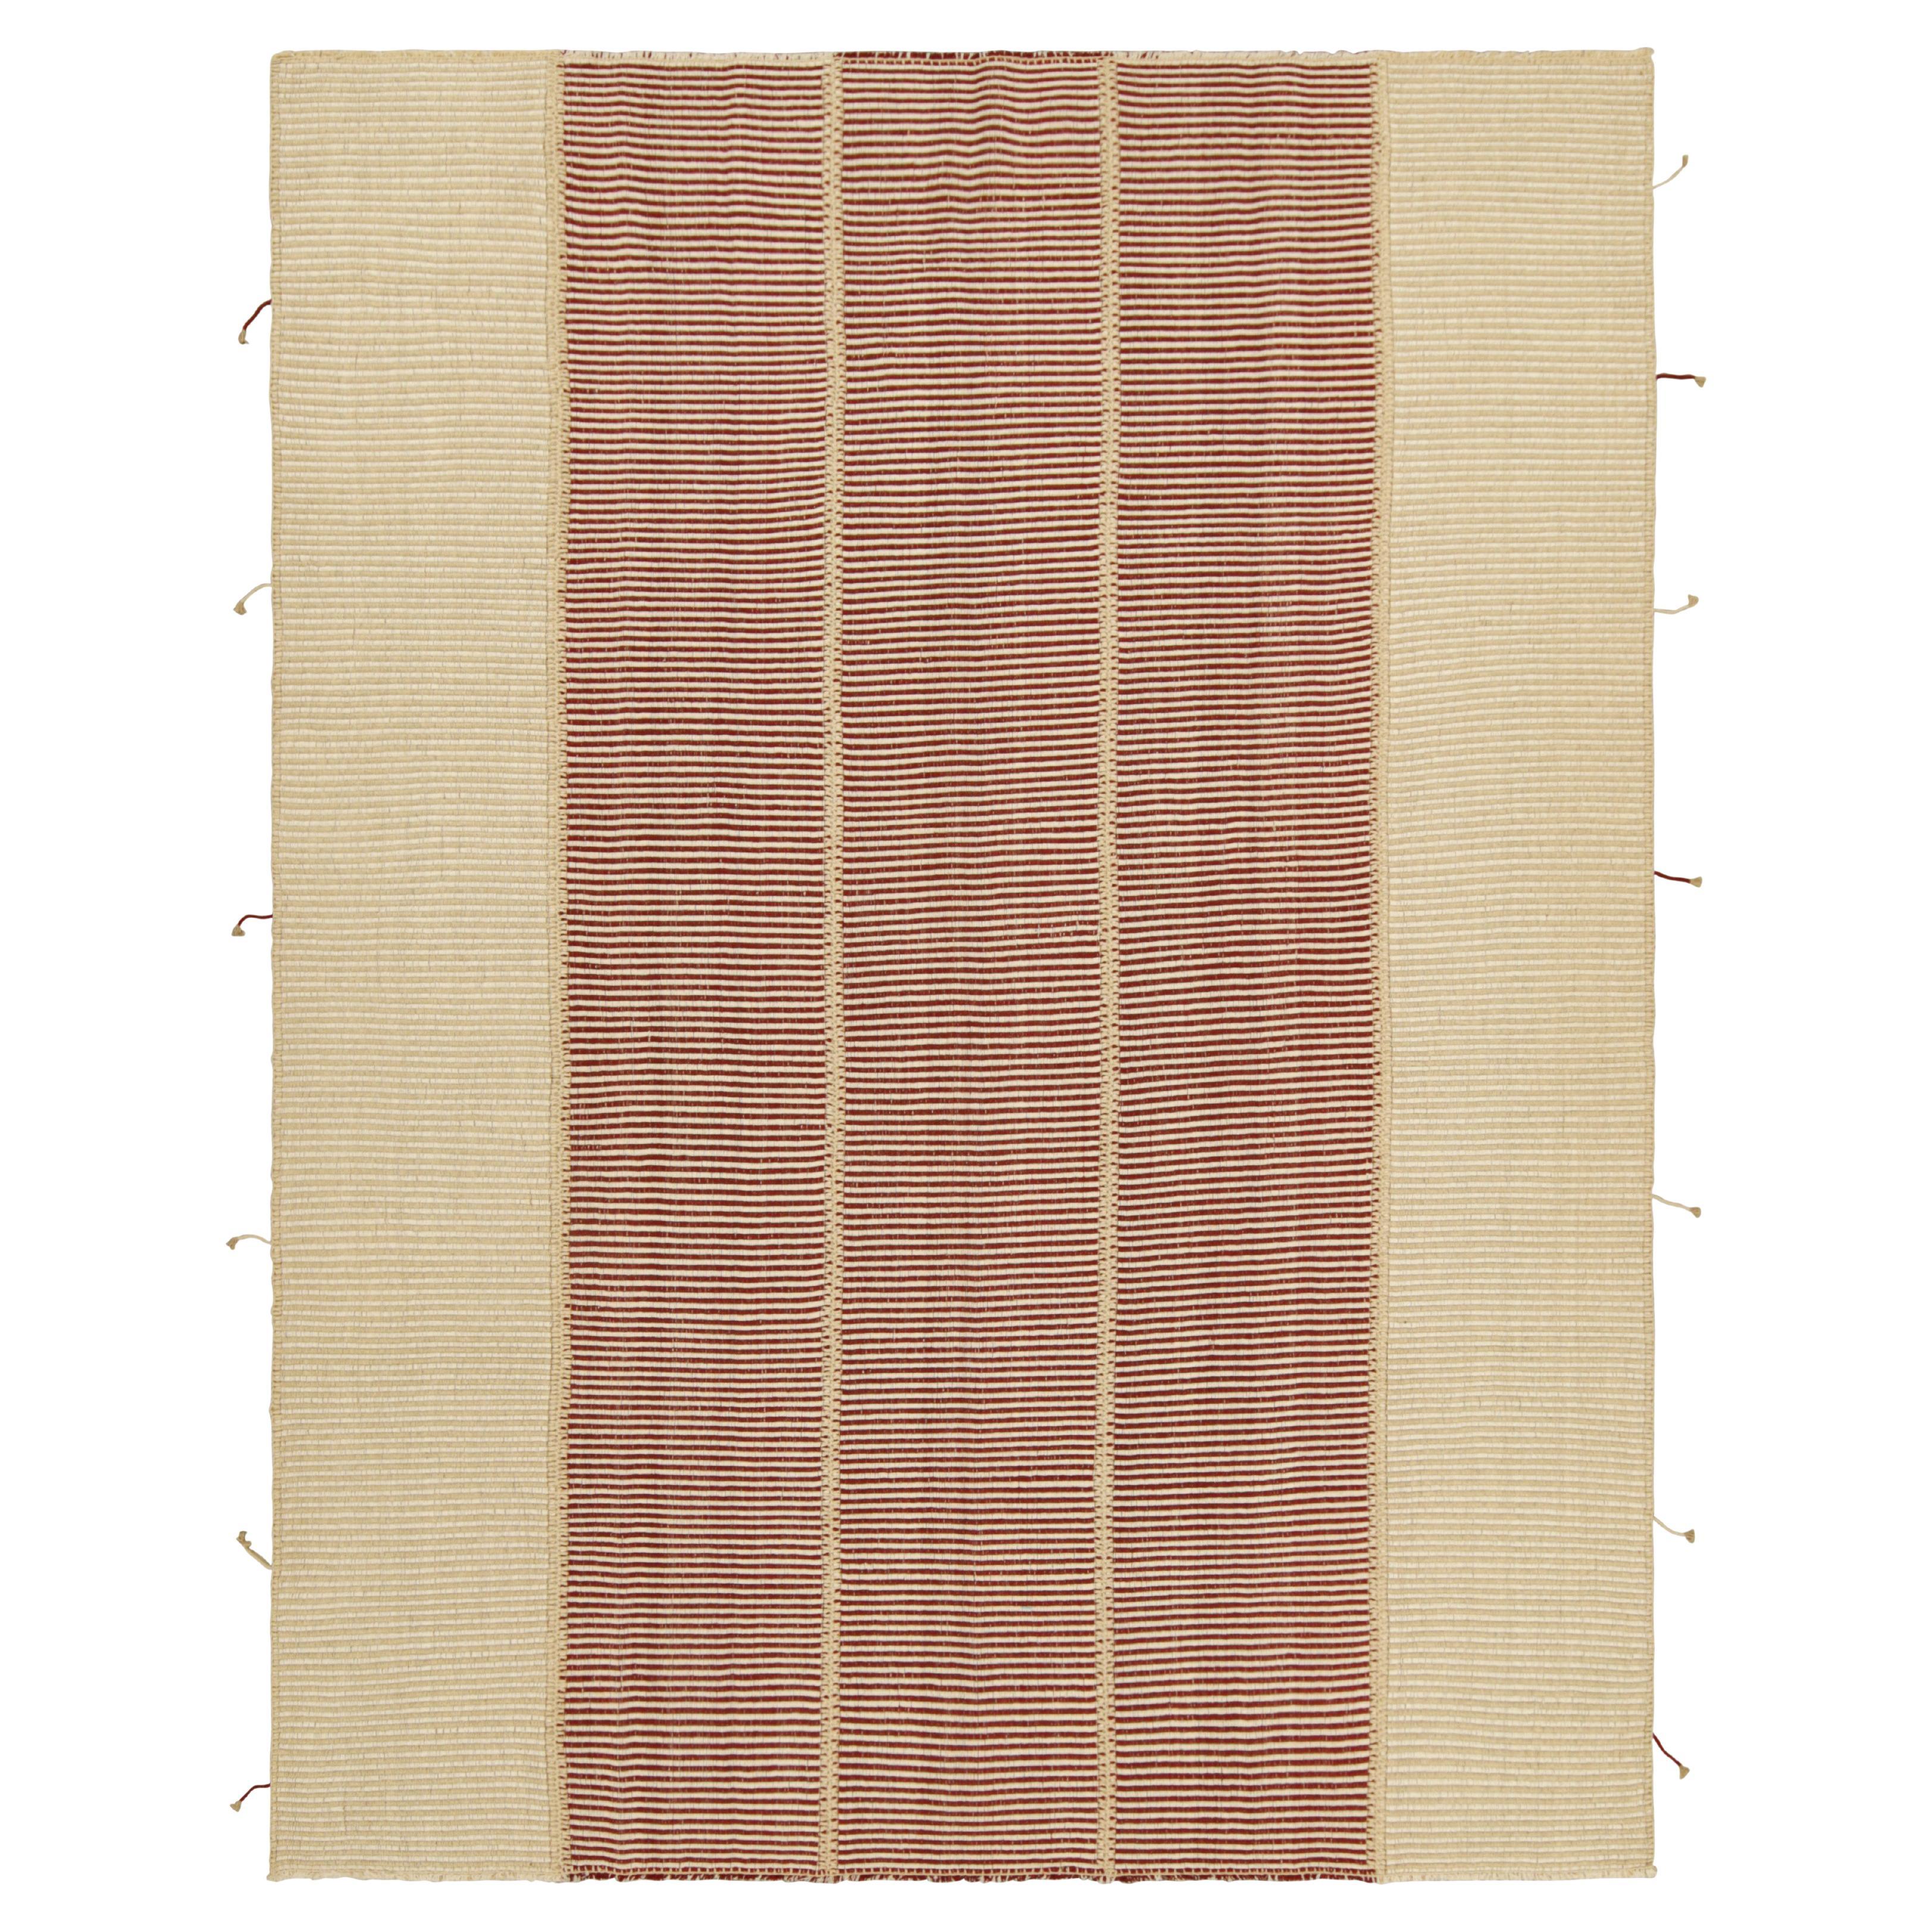 Rug & Kilim’s Contemporary Kilim in Red and Beige Textural Stripes For Sale